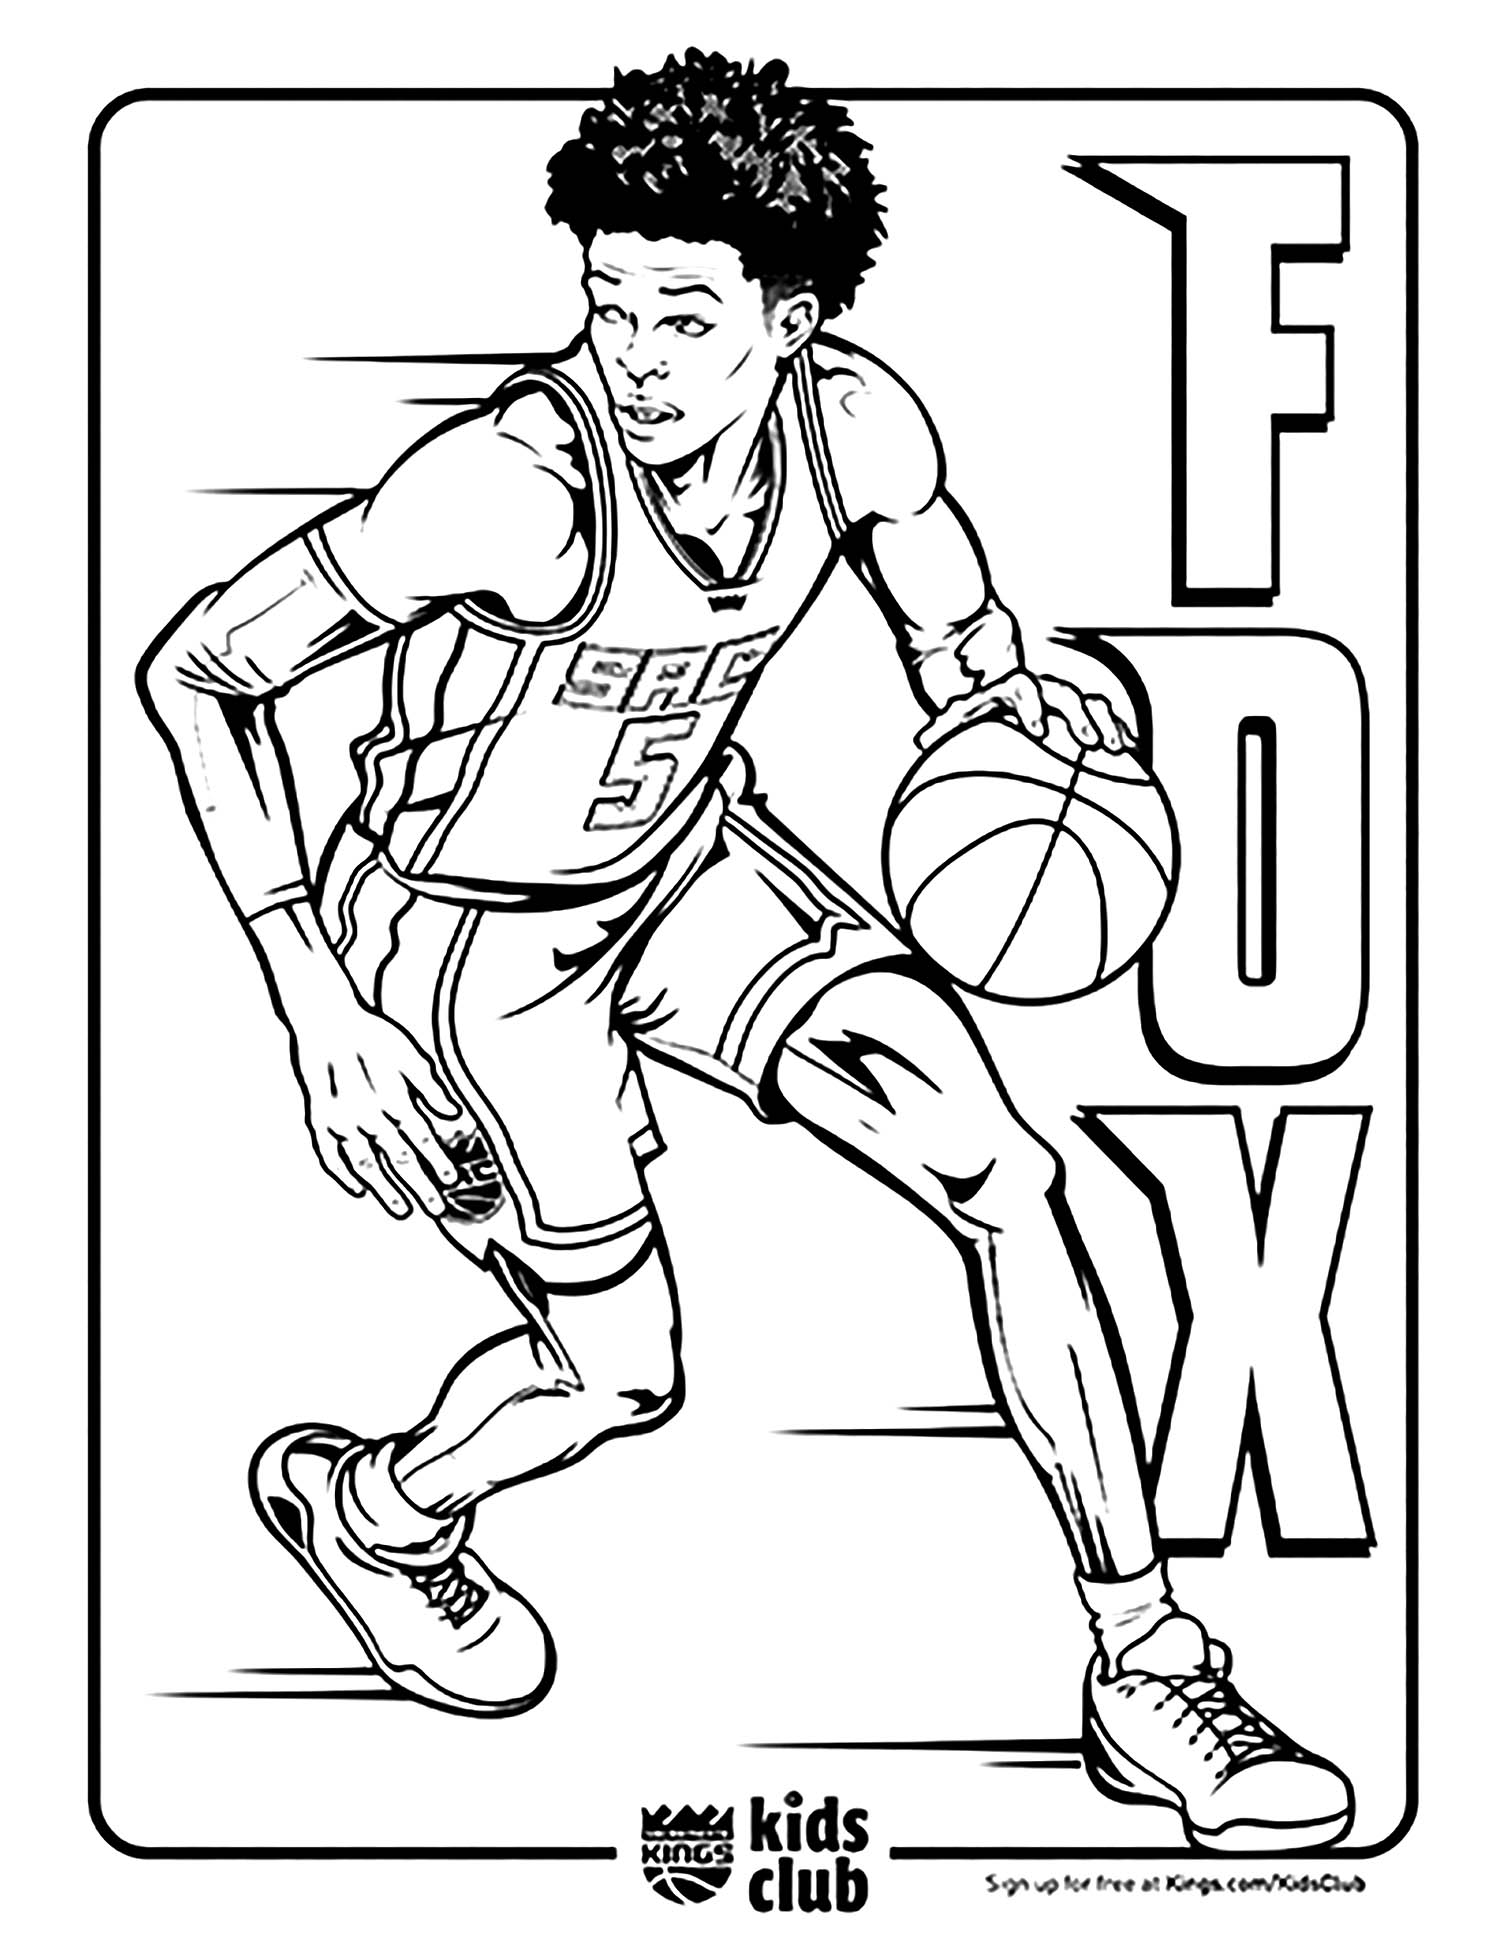 Free basketball drawing to print and color - Basketball Kids Coloring Pages